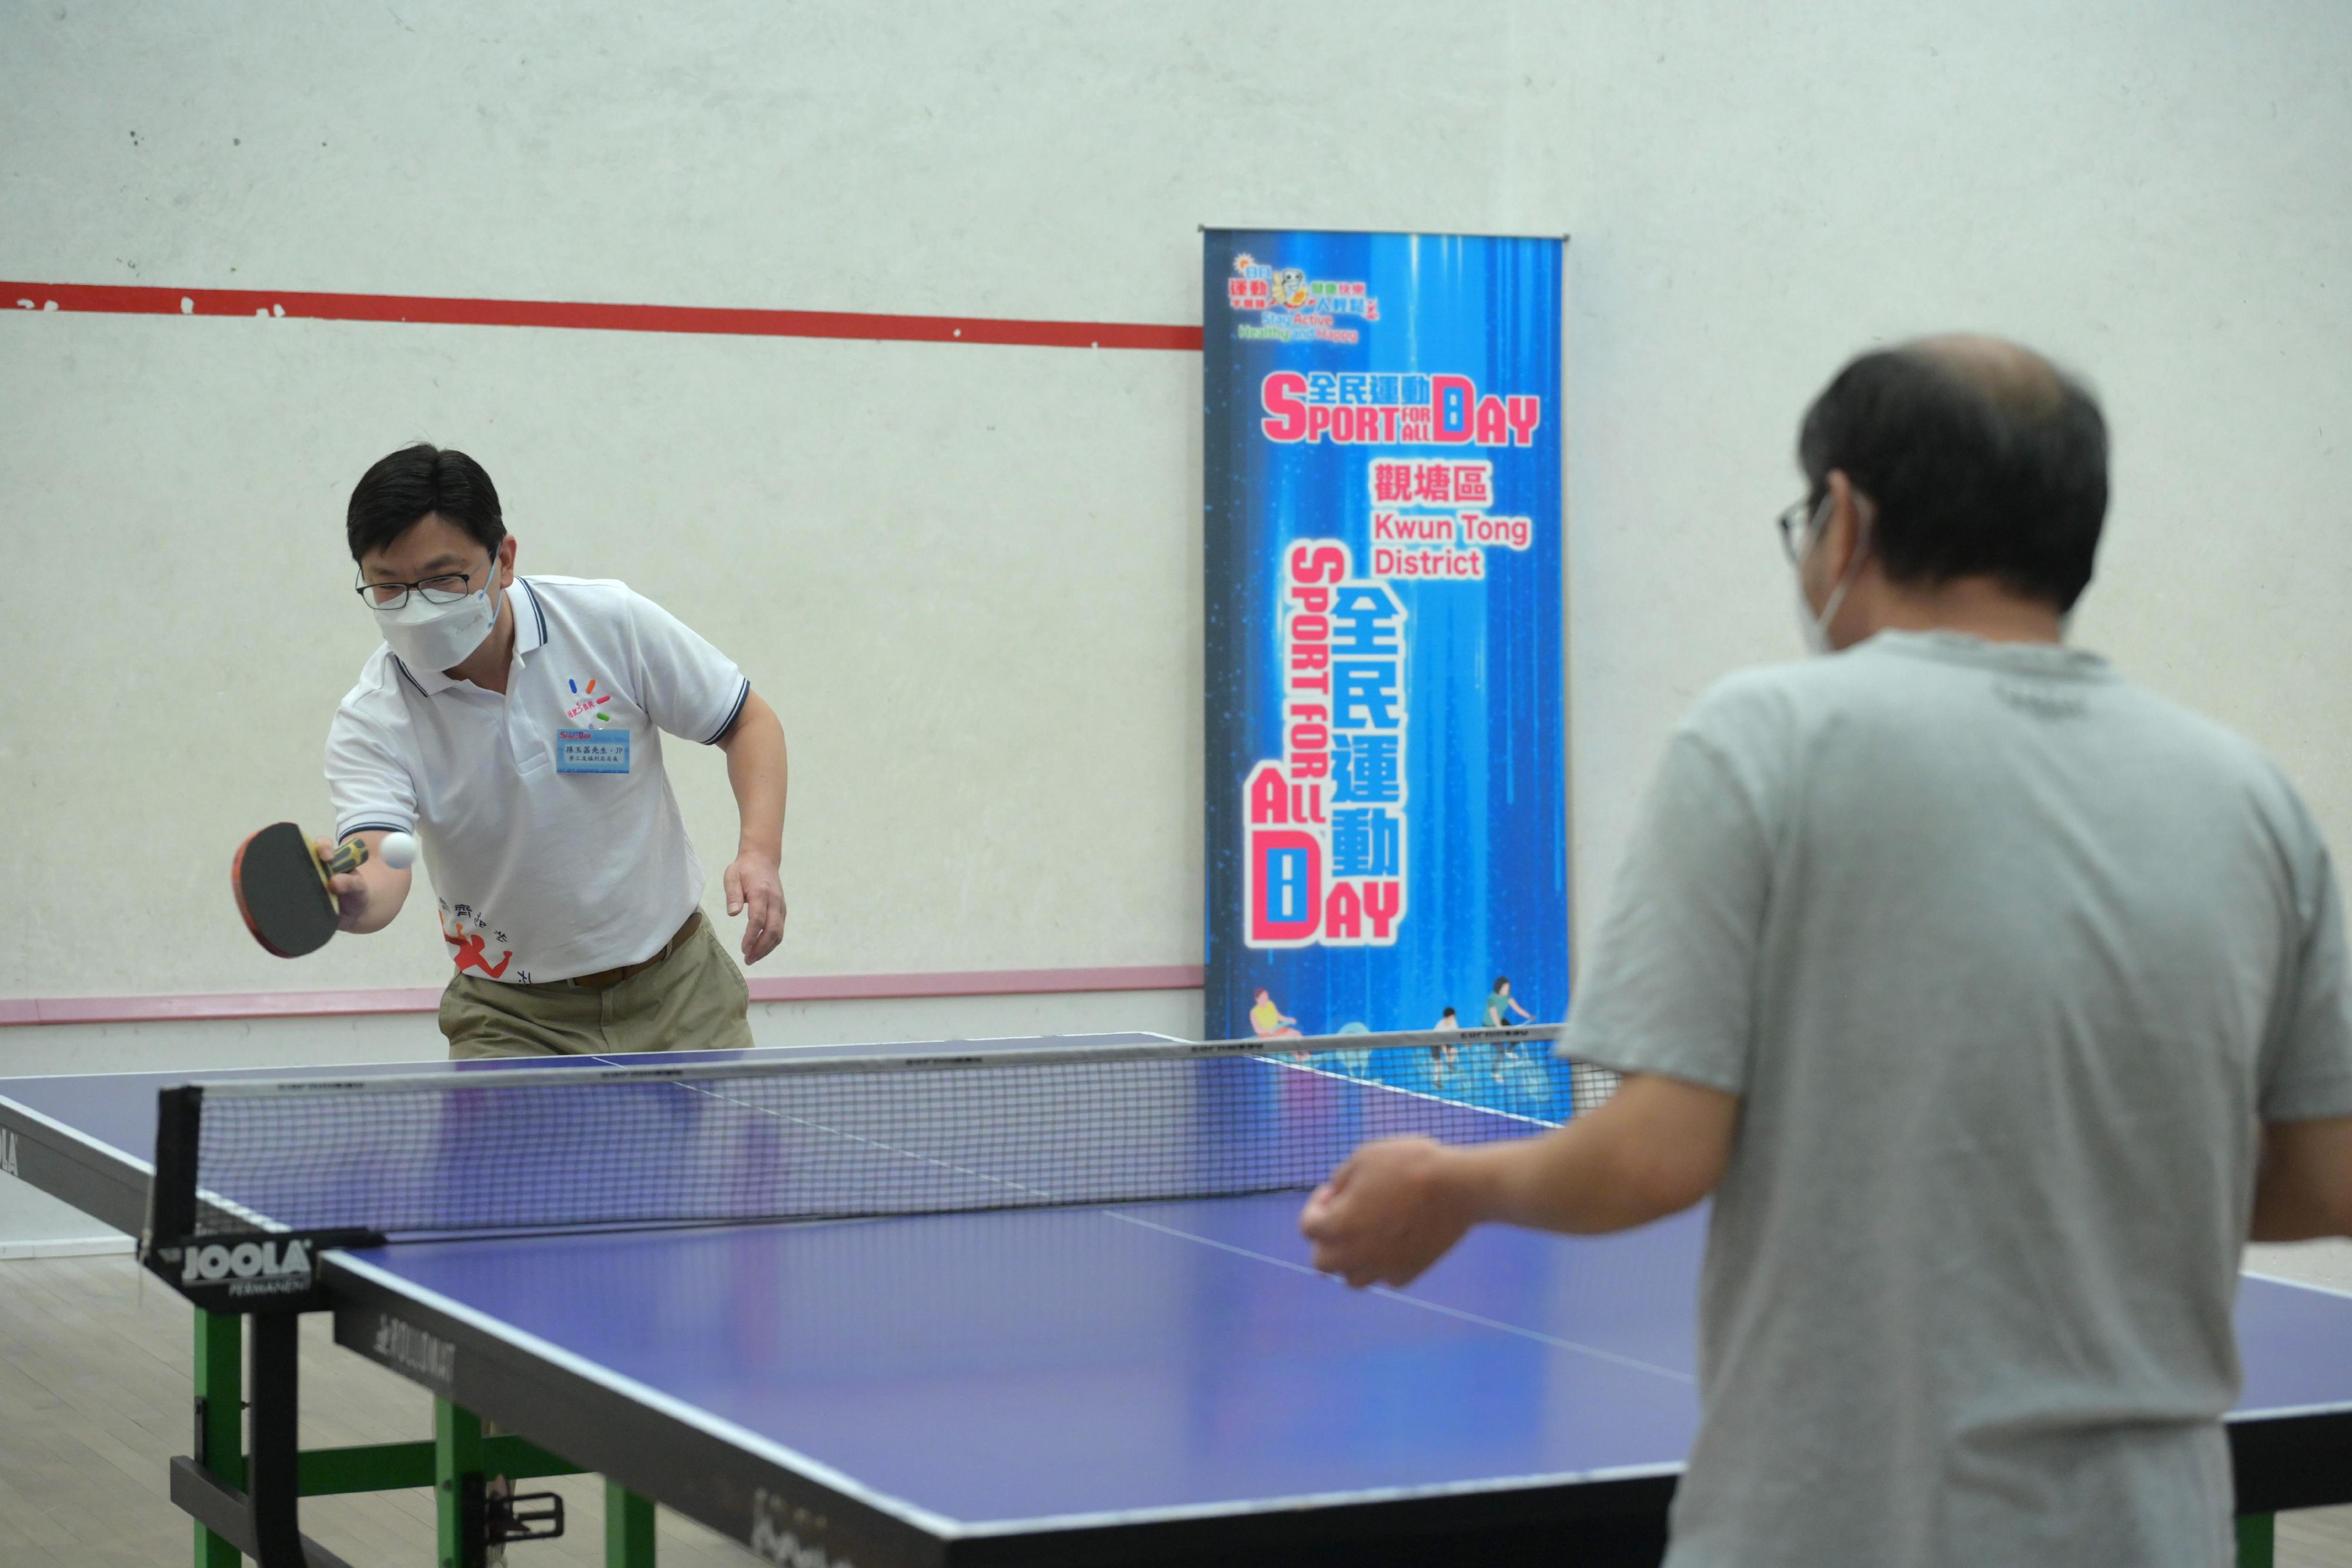 The Secretary for Labour and Welfare, Mr Chris Sun, joined the public for sports and recreation programmes at Lei Yue Mun Sports Centre this afternoon (August 7) as part of Sport For All Day 2022 organised by the Leisure and Cultural Services Department. Photo shows Mr Sun (left) playing table tennis with a member of the public.